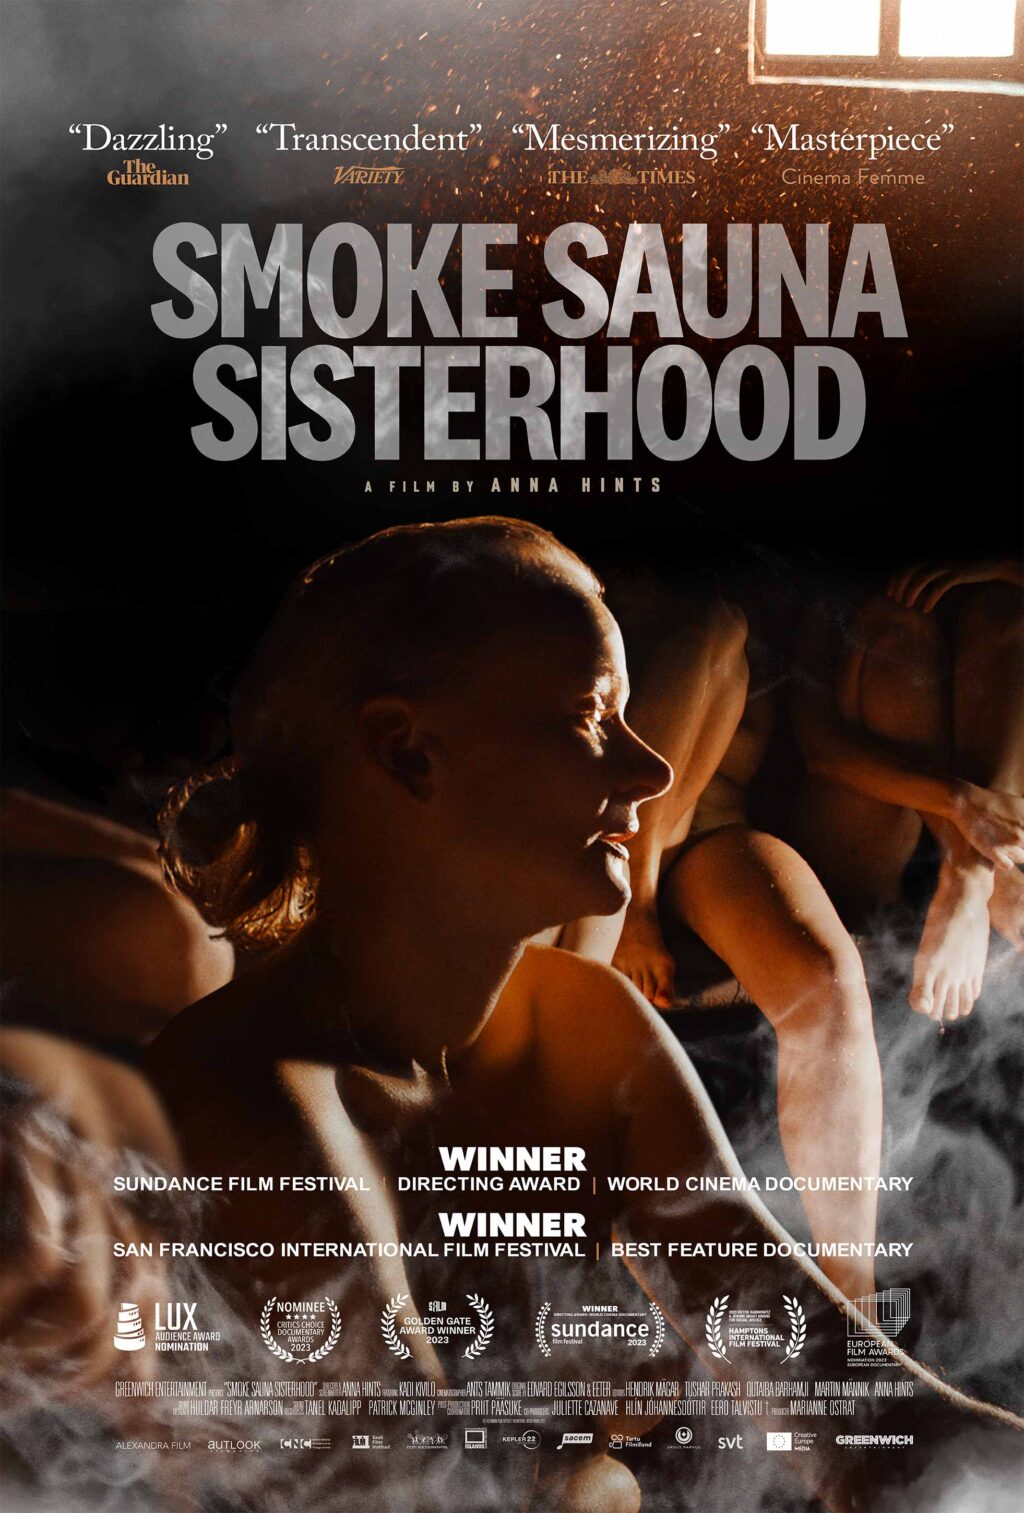 a film poster showing someone sitting in a sauna with their hair puled back, with the films title "smoke sauna sisterhood" in the forefront of the image